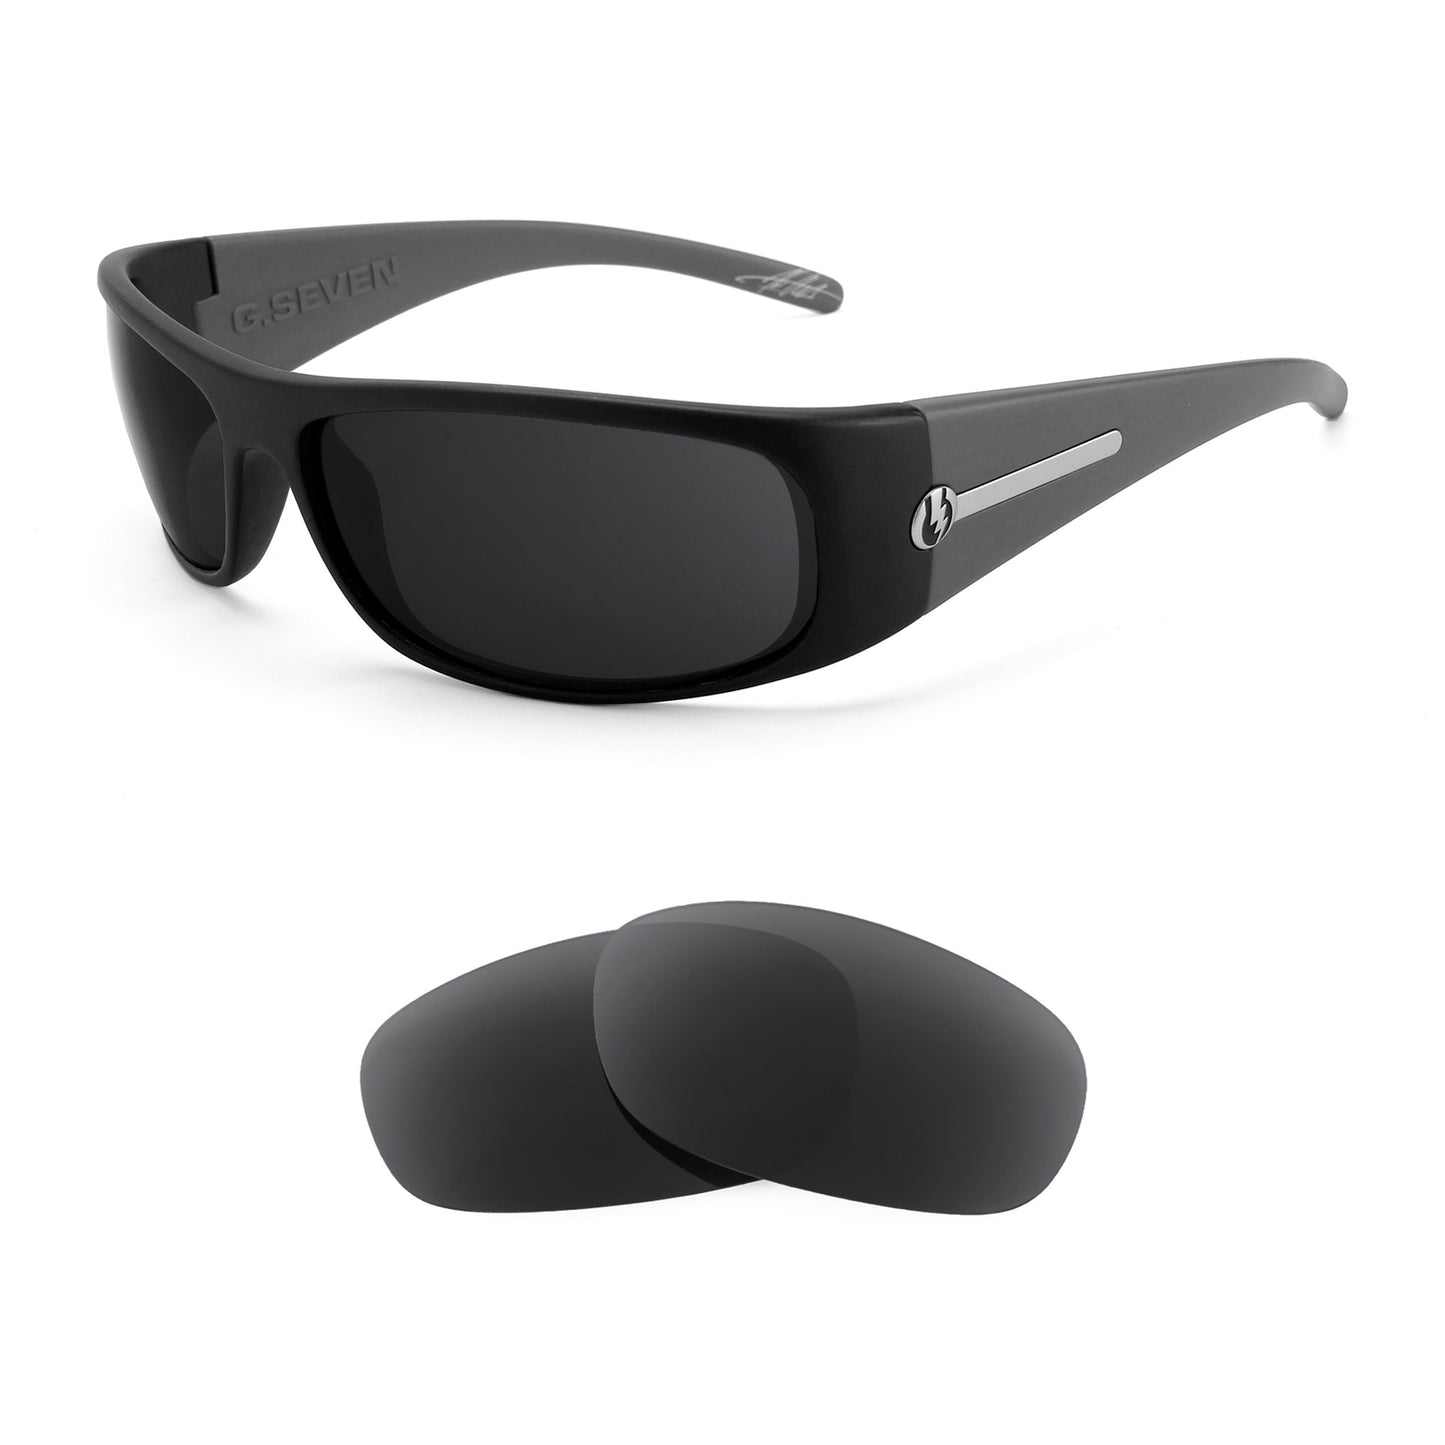 Electric G. Seven sunglasses with replacement lenses